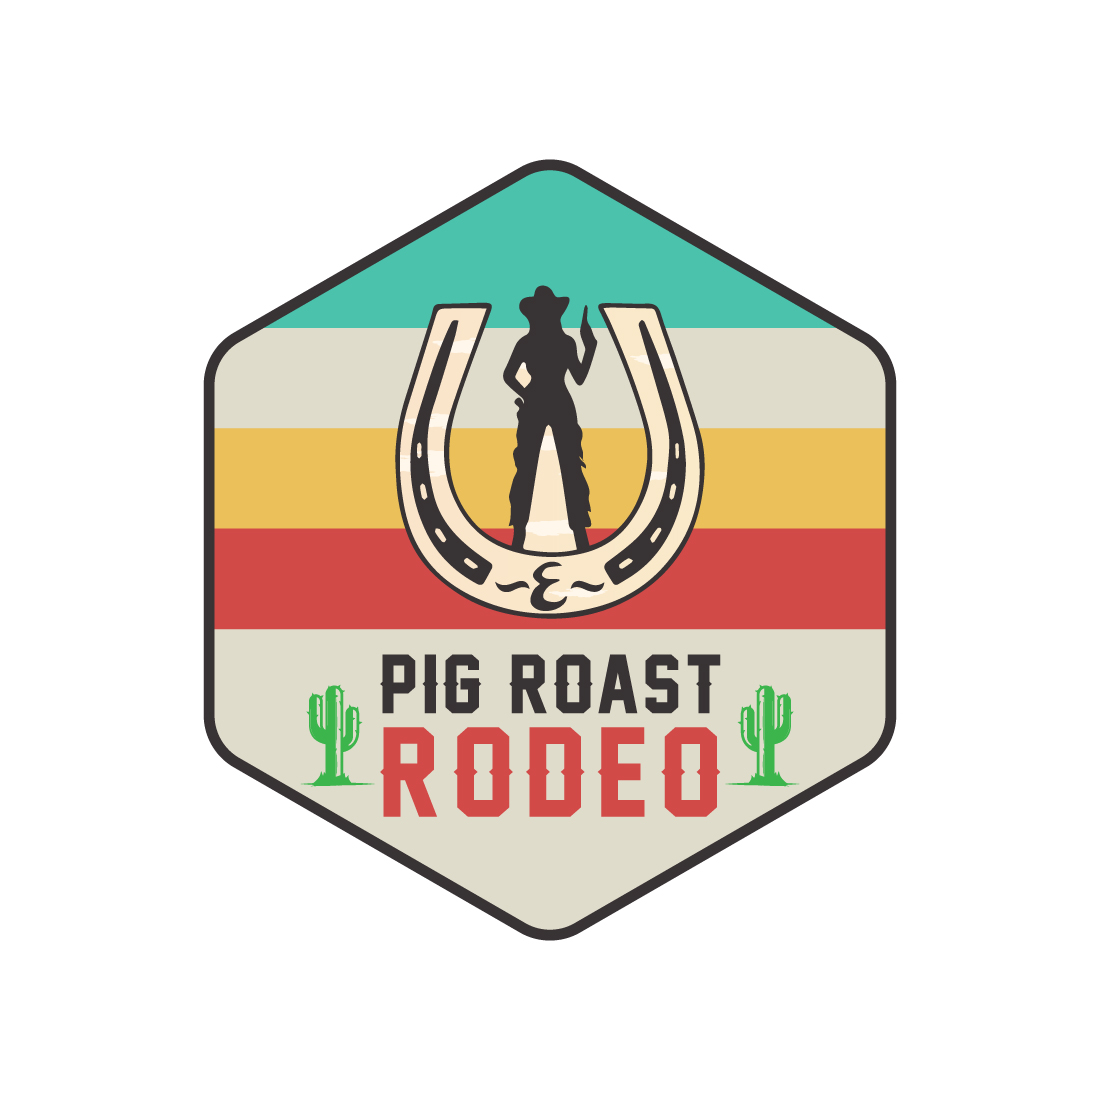 PIG ROAST RODEO cover image.